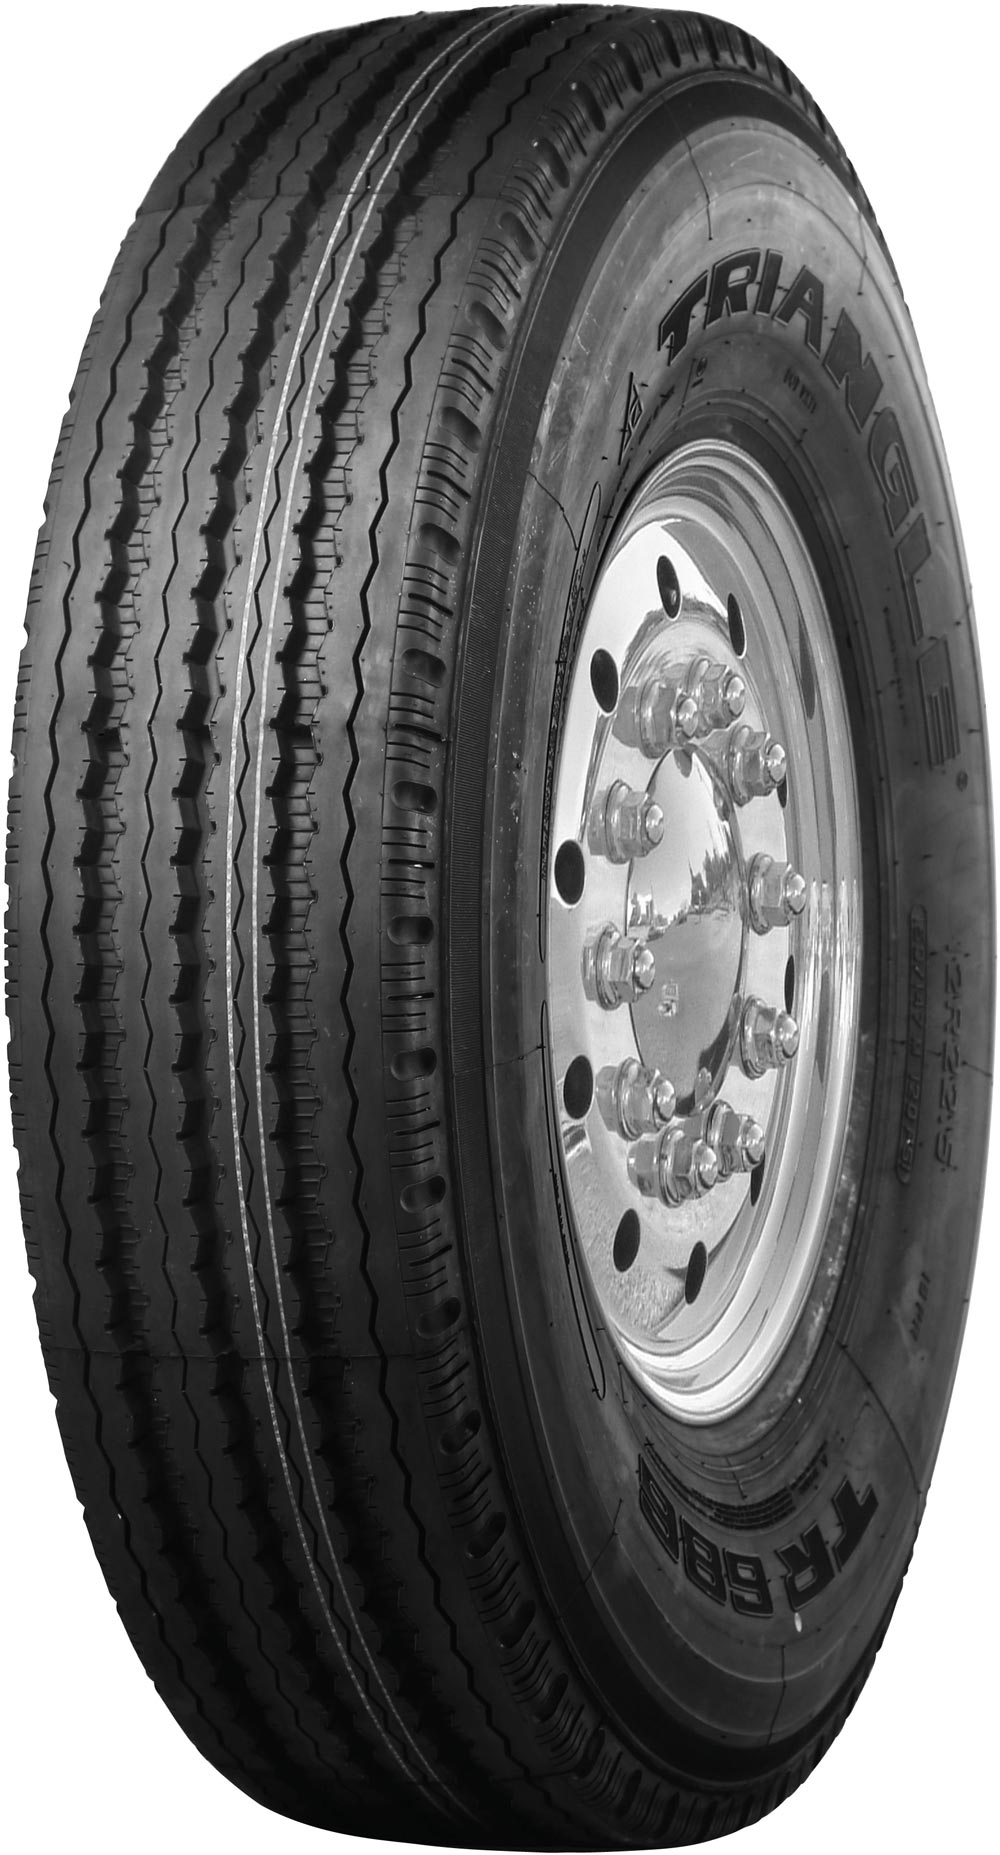 product_type-heavy_tires Triangle TR686 16PR 11 R24.5 149M